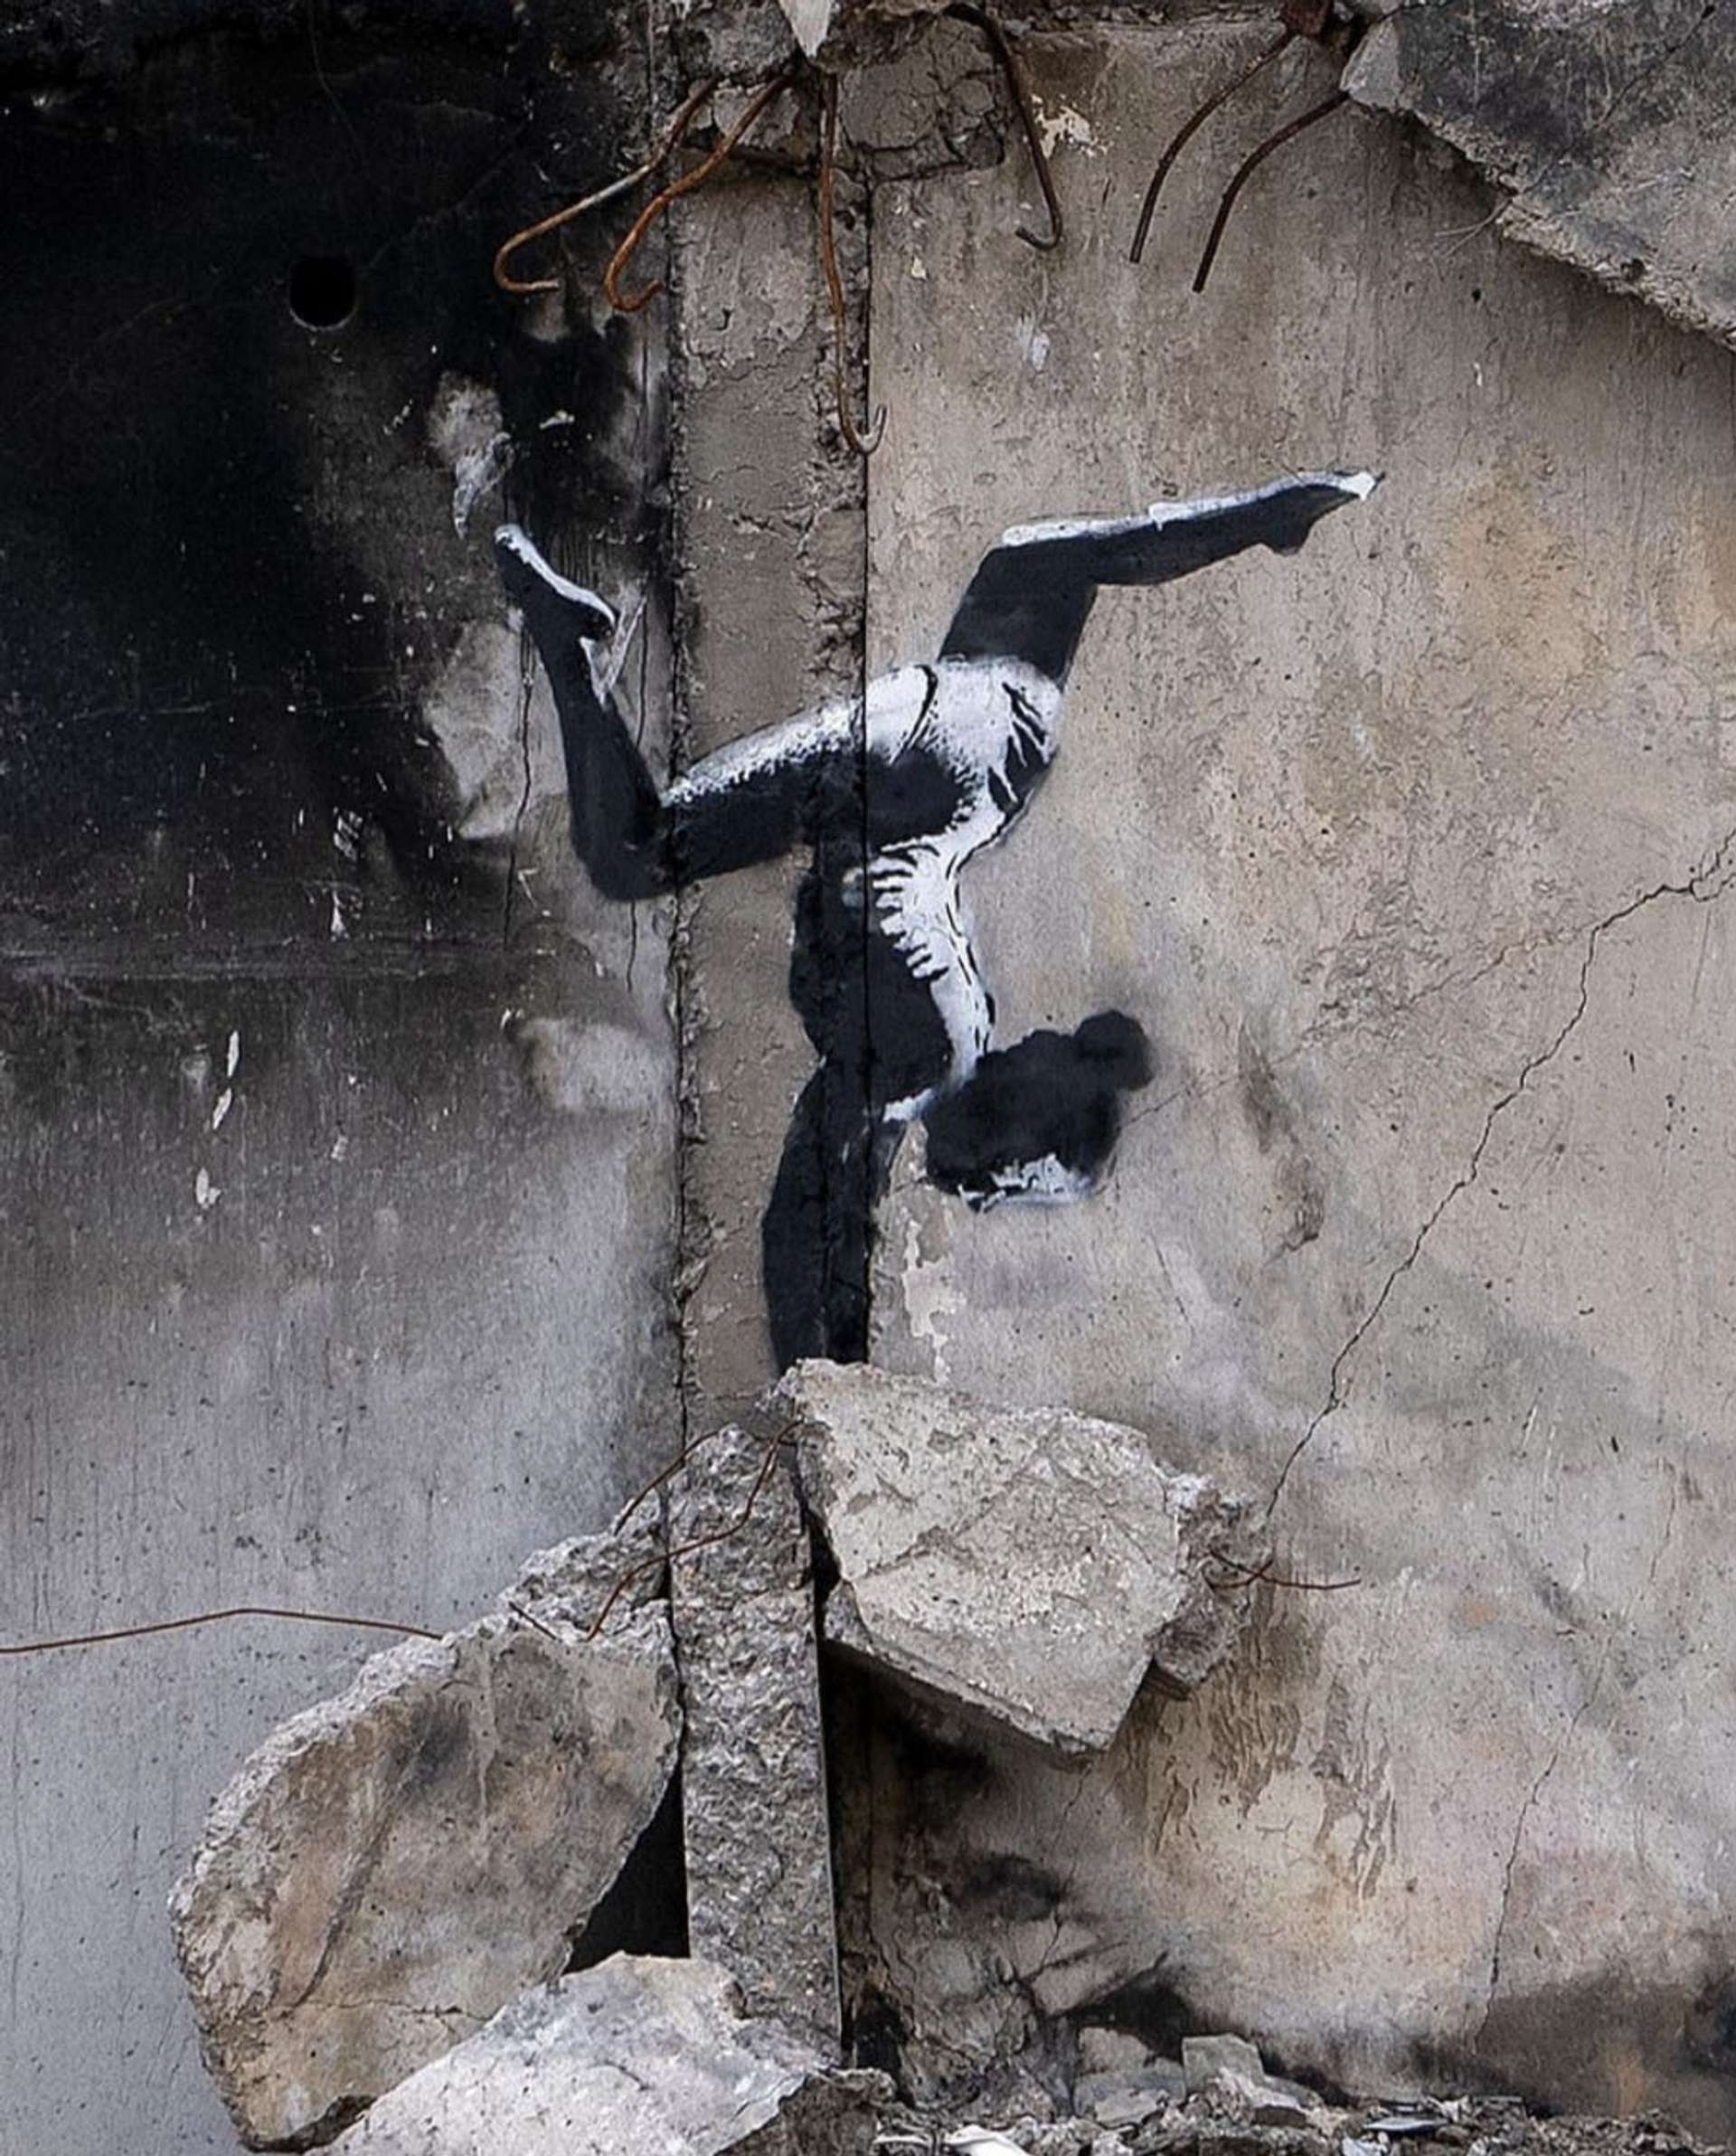 One of Banksy's murals in Ukraine depicting a young girl doing acrobatics amid the rubble.